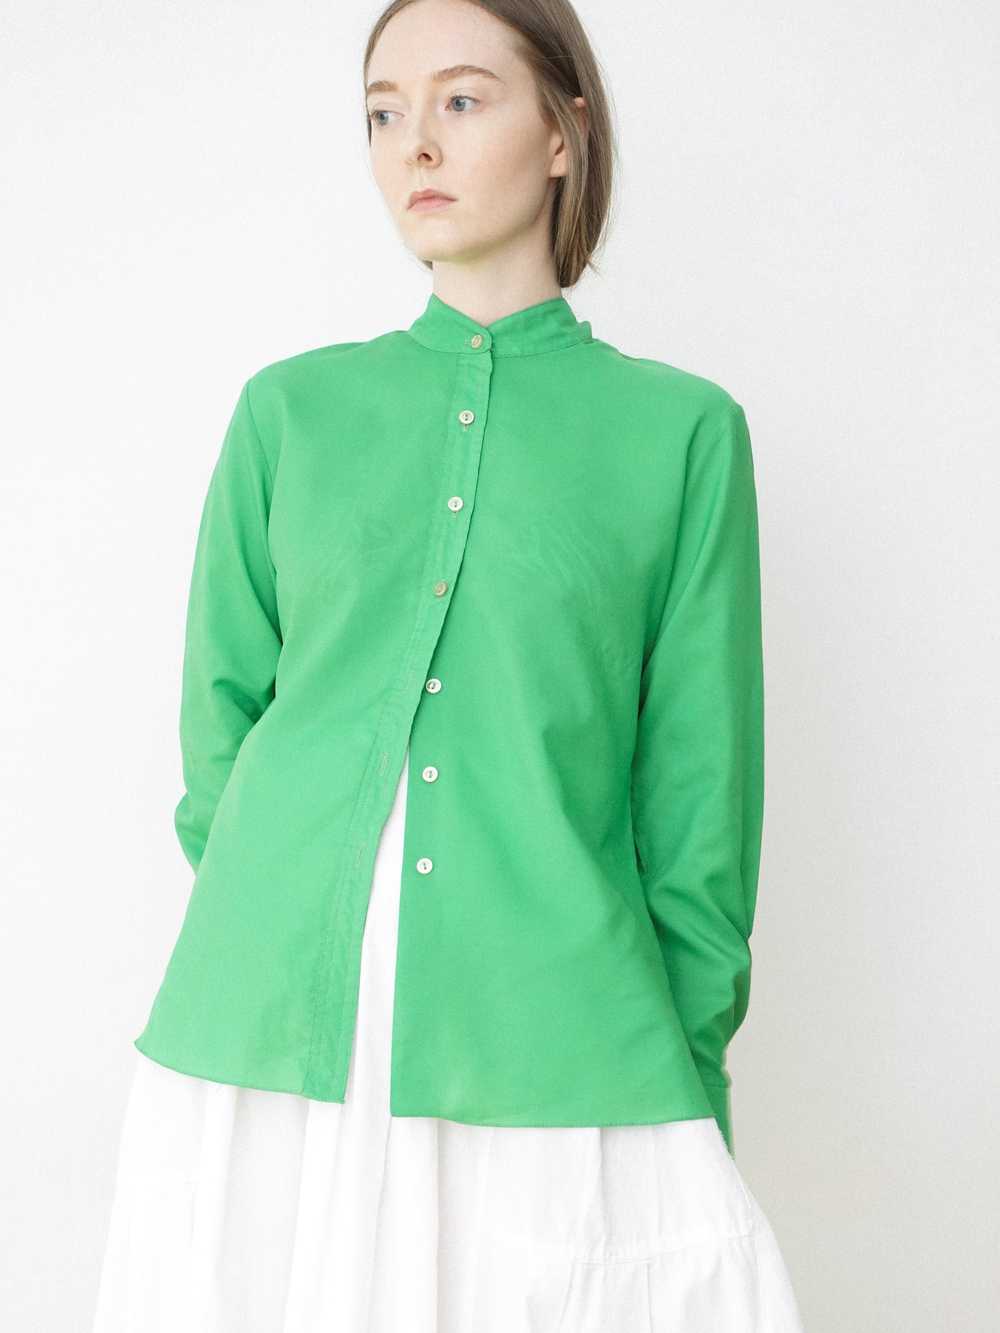 Kelly Green Band Collar Button Up Blouse - image 3